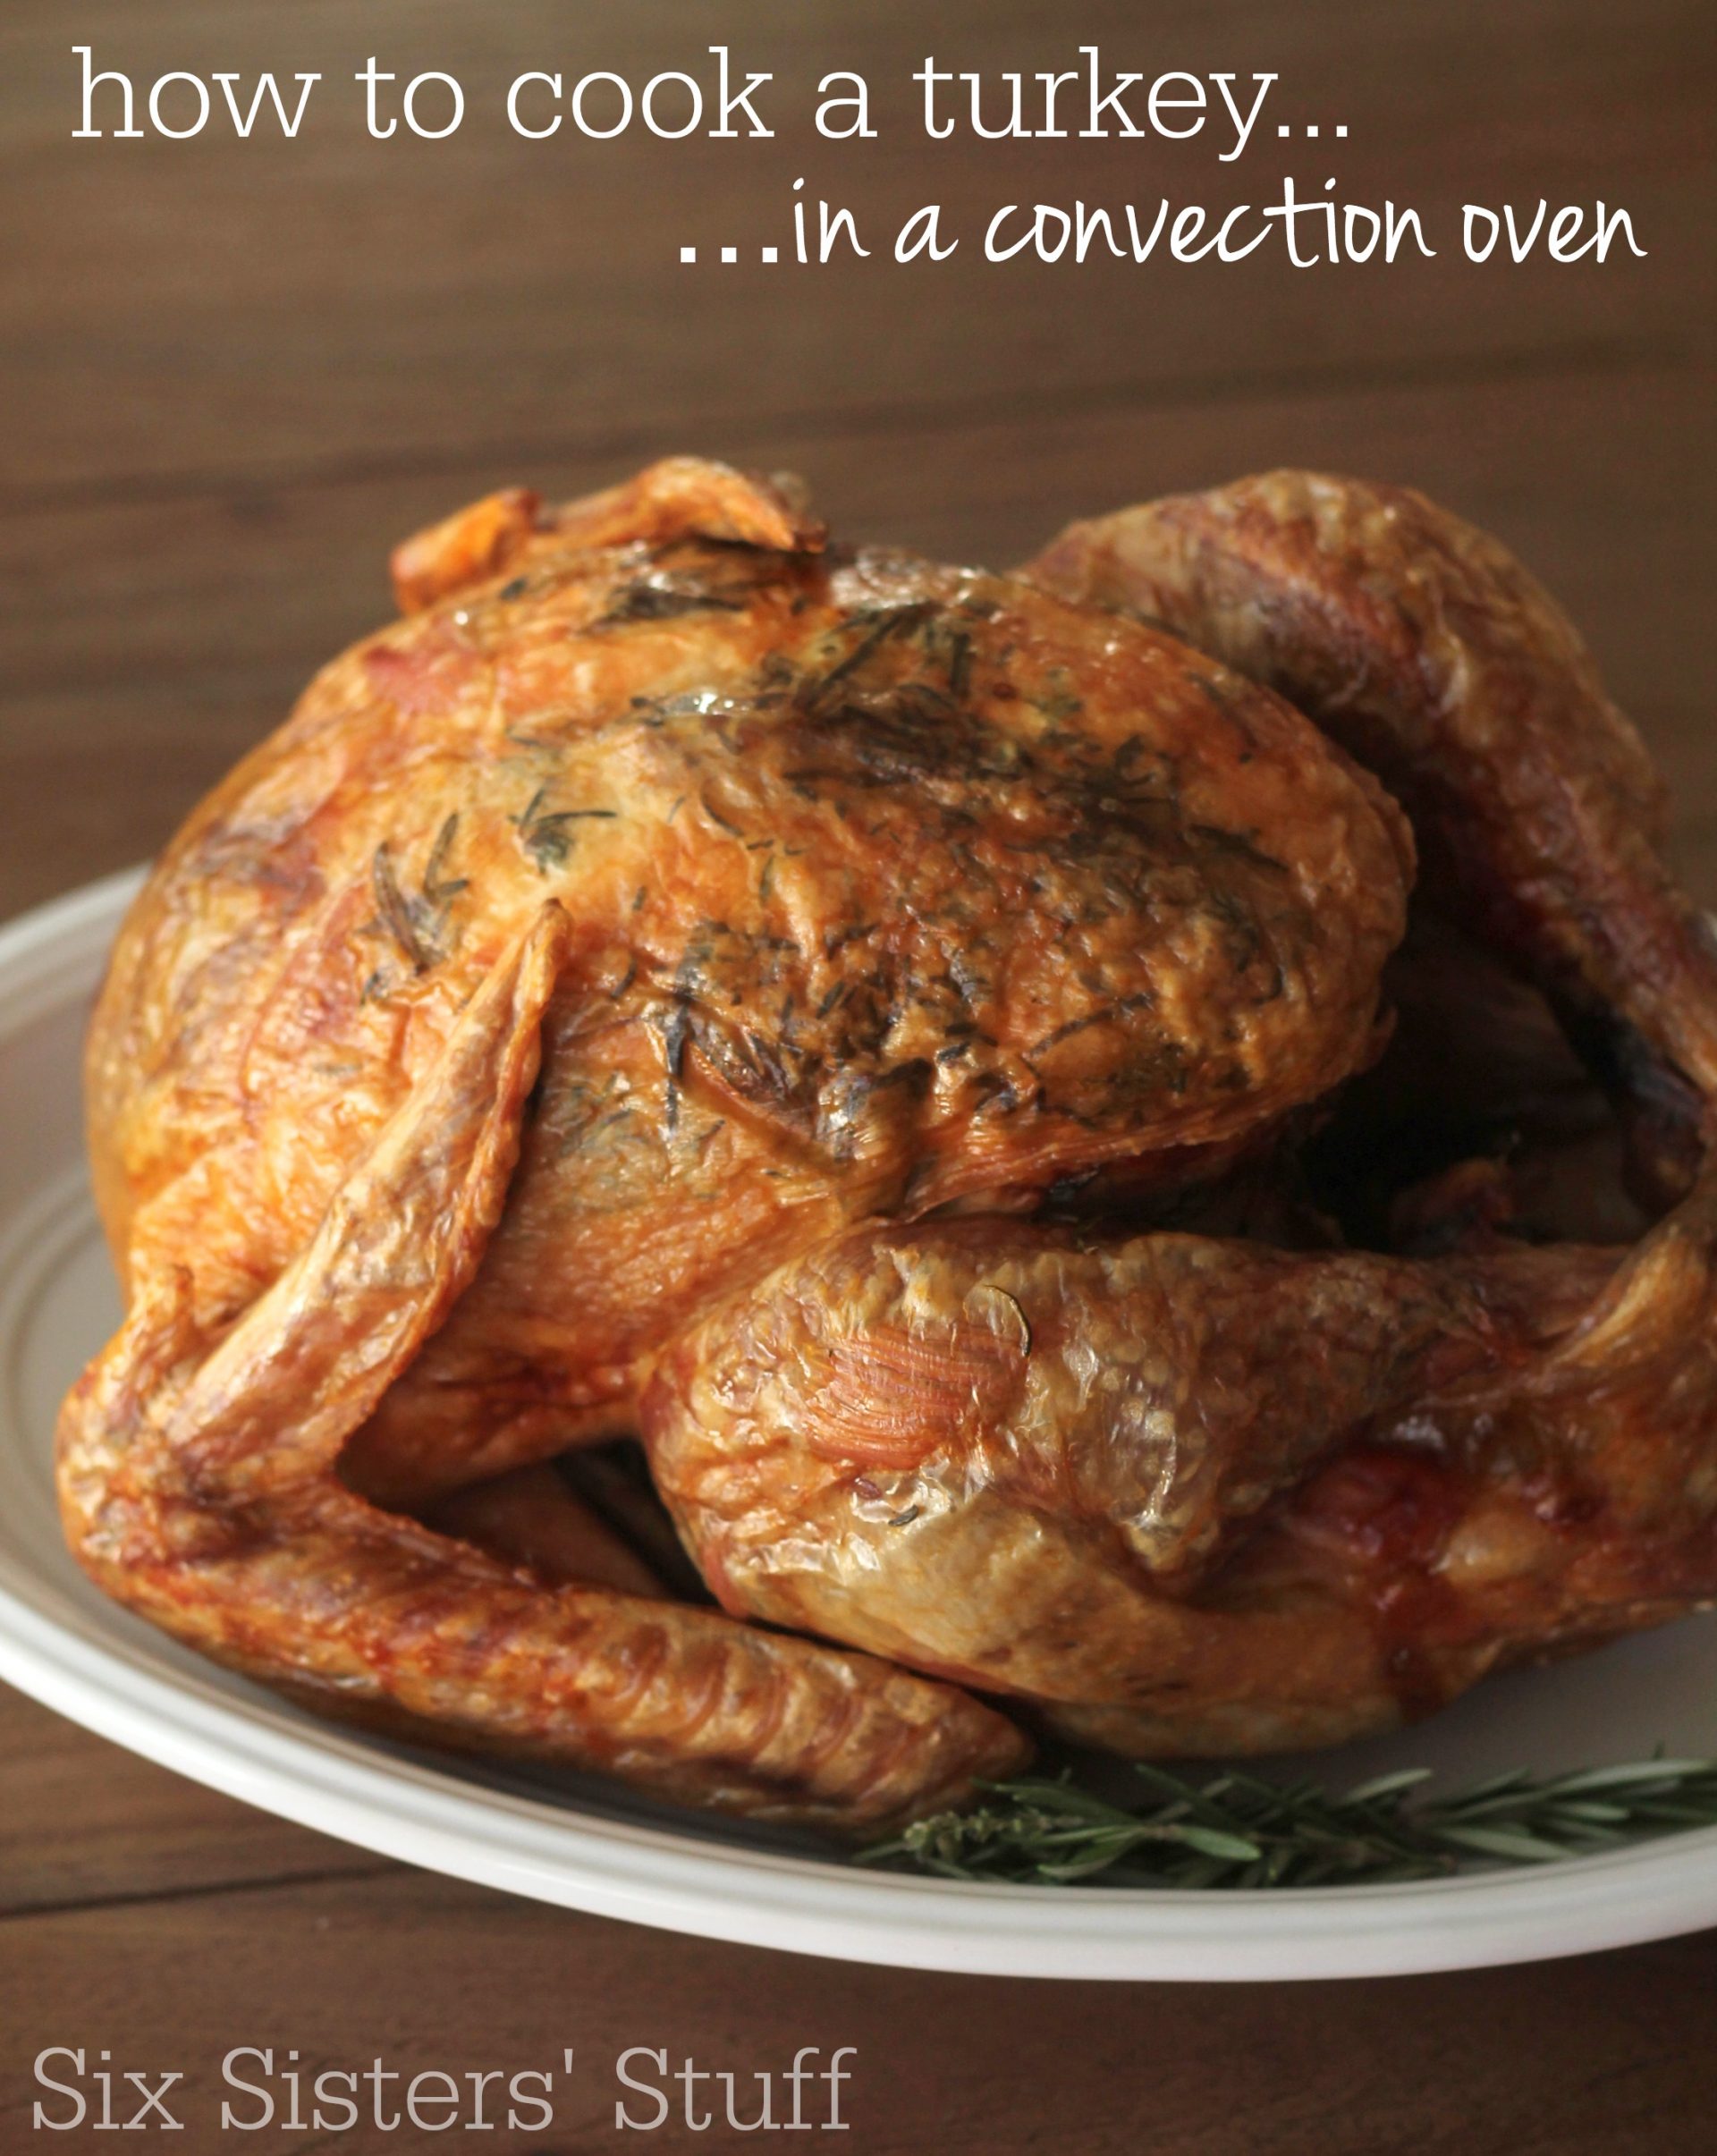 https://www.sixsistersstuff.com/wp-content/uploads/2019/11/How-to-Cook-a-Turkey-in-the-Convection-Oven.jpg